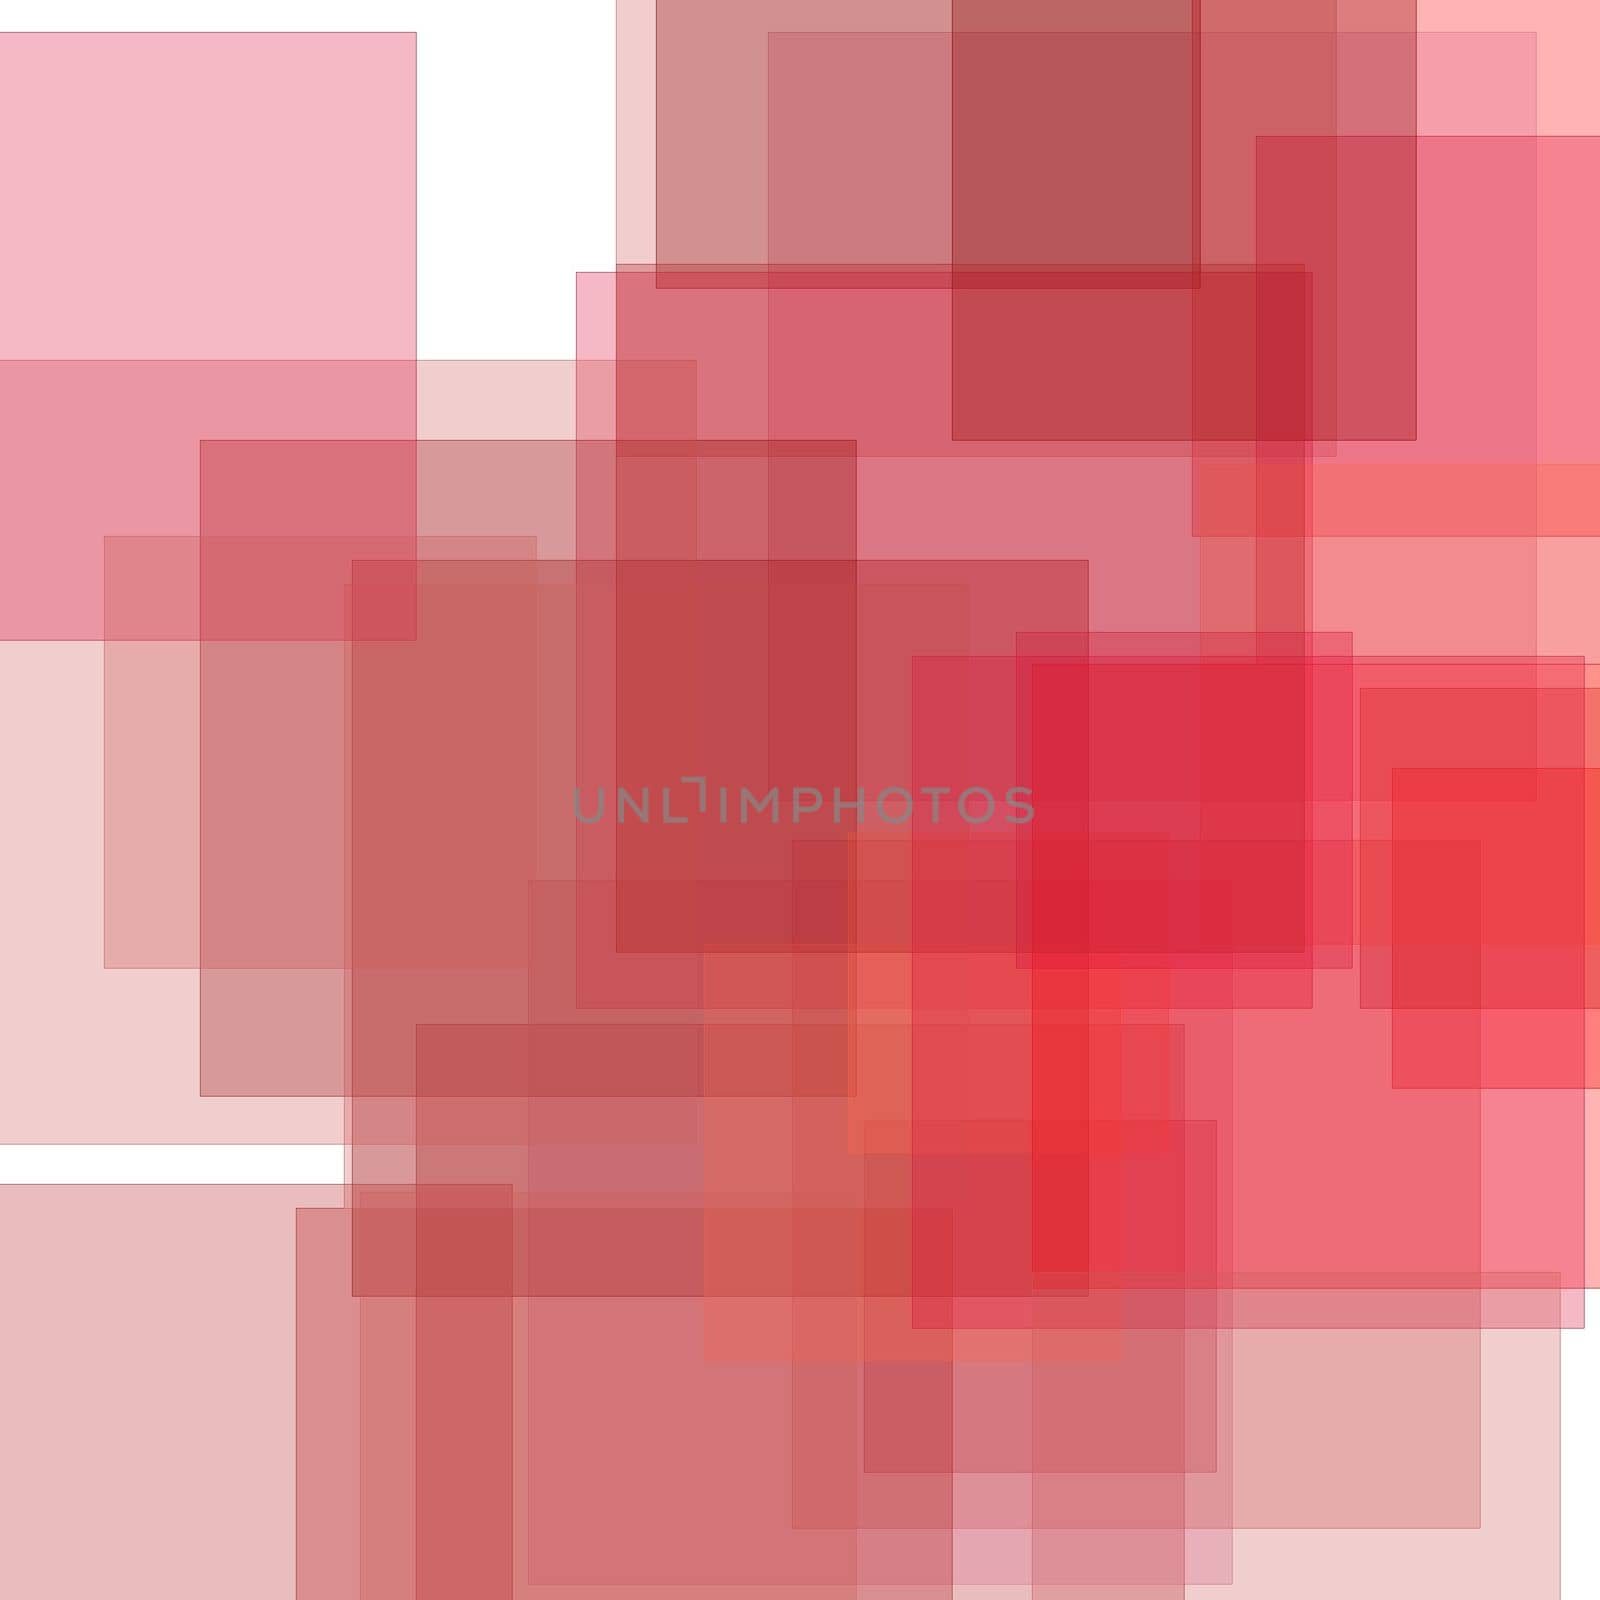 Abstract minimalist red illustration with squares useful as a background